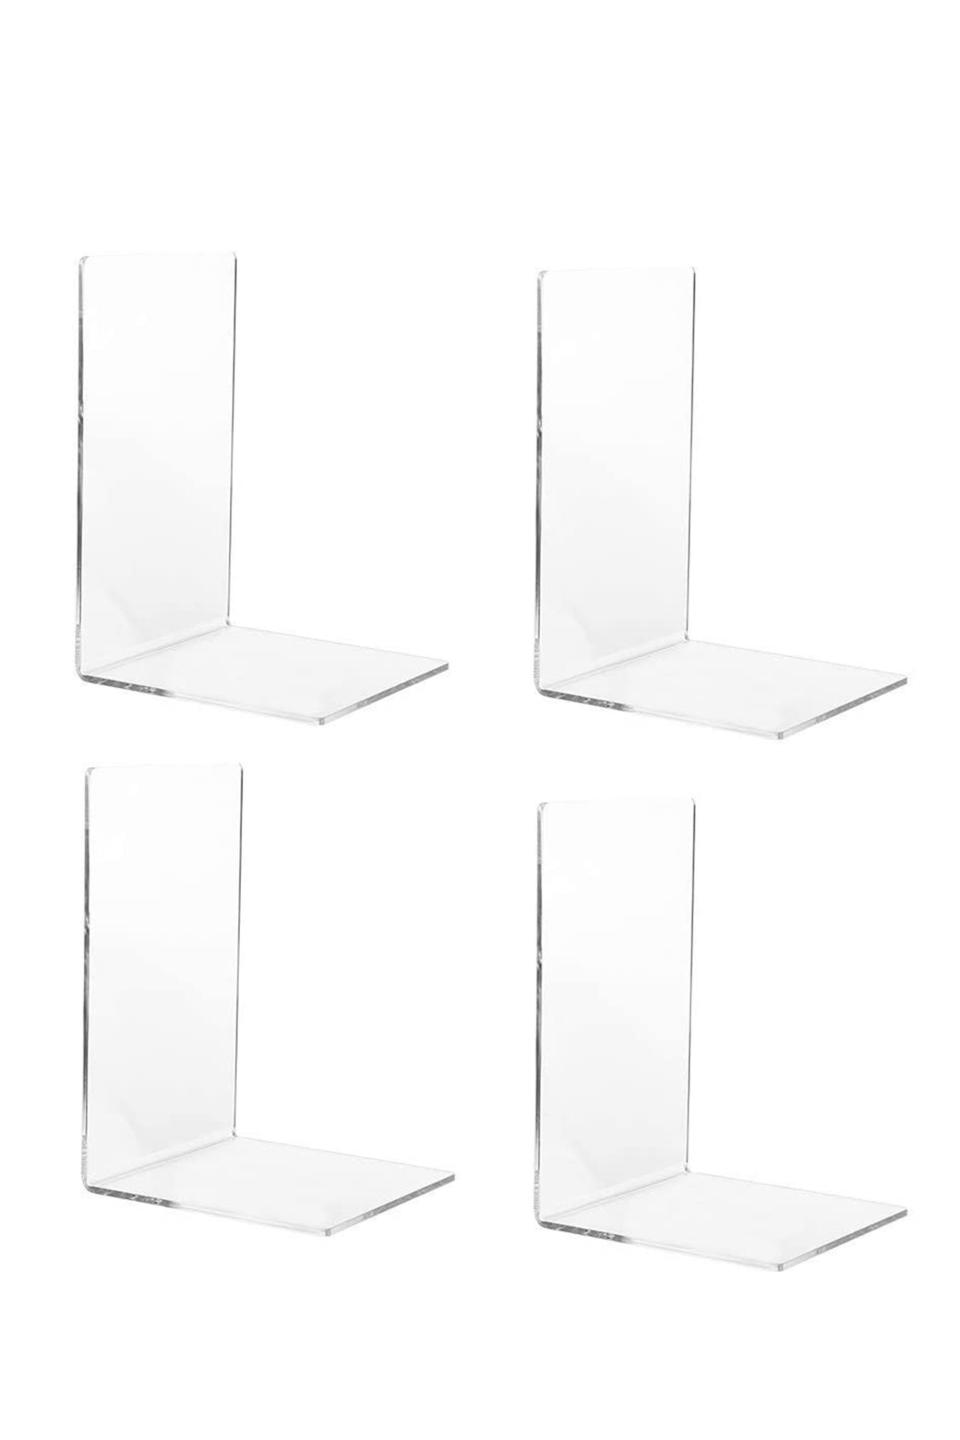 46) CY craft Clear Acrylic Bookends (Set of 4)